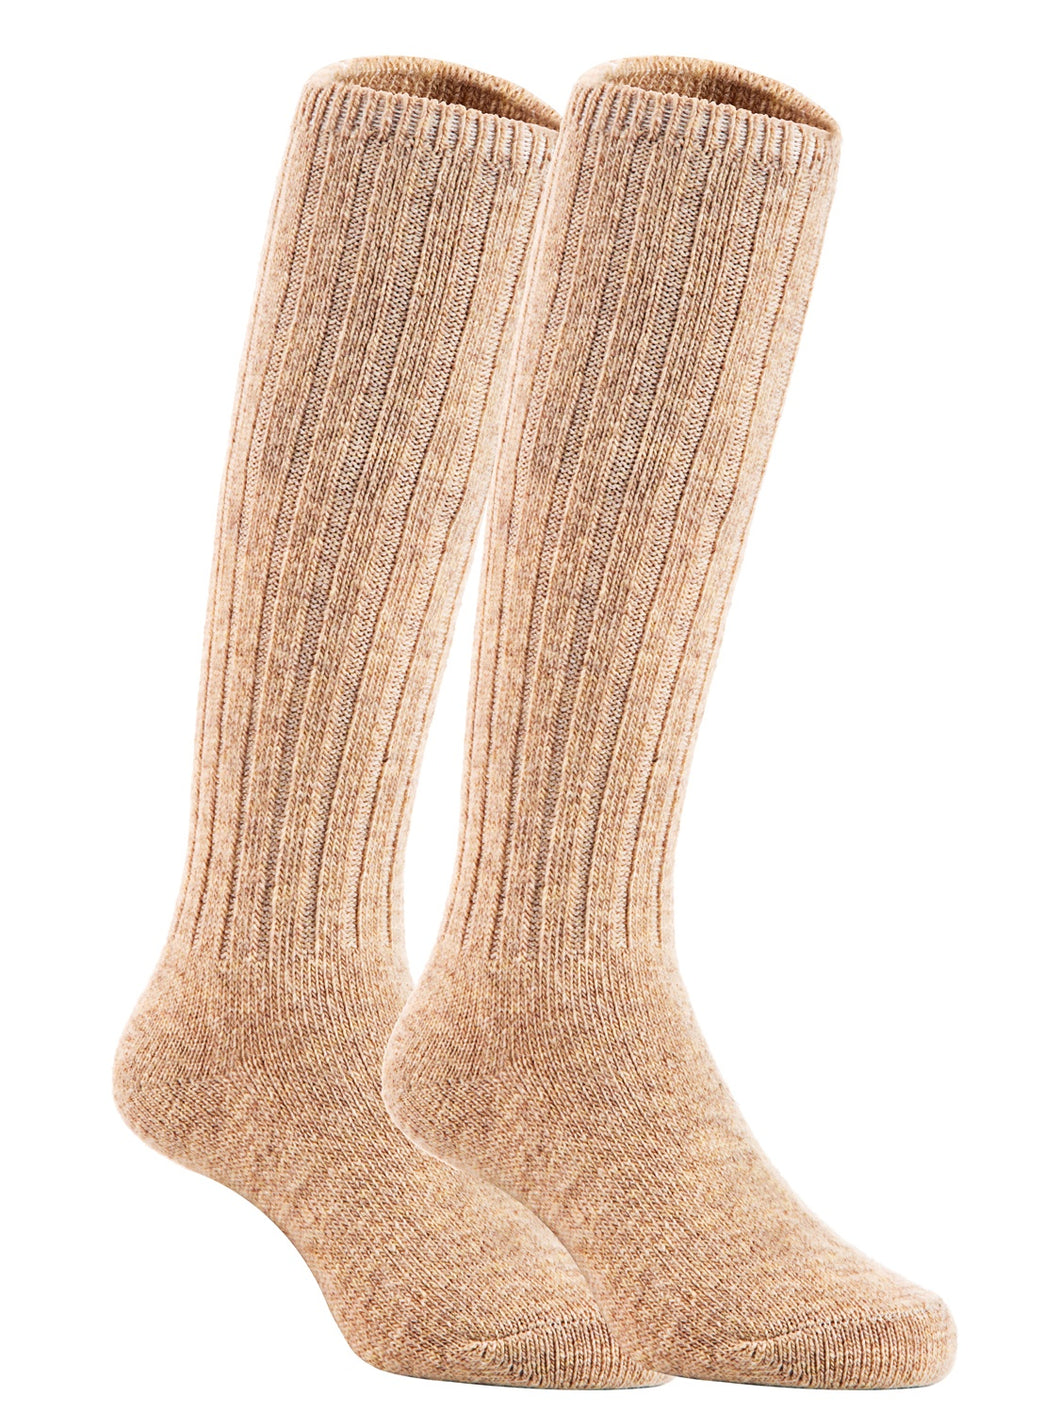 Lian Style Unisex Baby Children 4 Pairs Knee-high Wool Boot Blend Boot Socks Size 4-6Y(Beige)